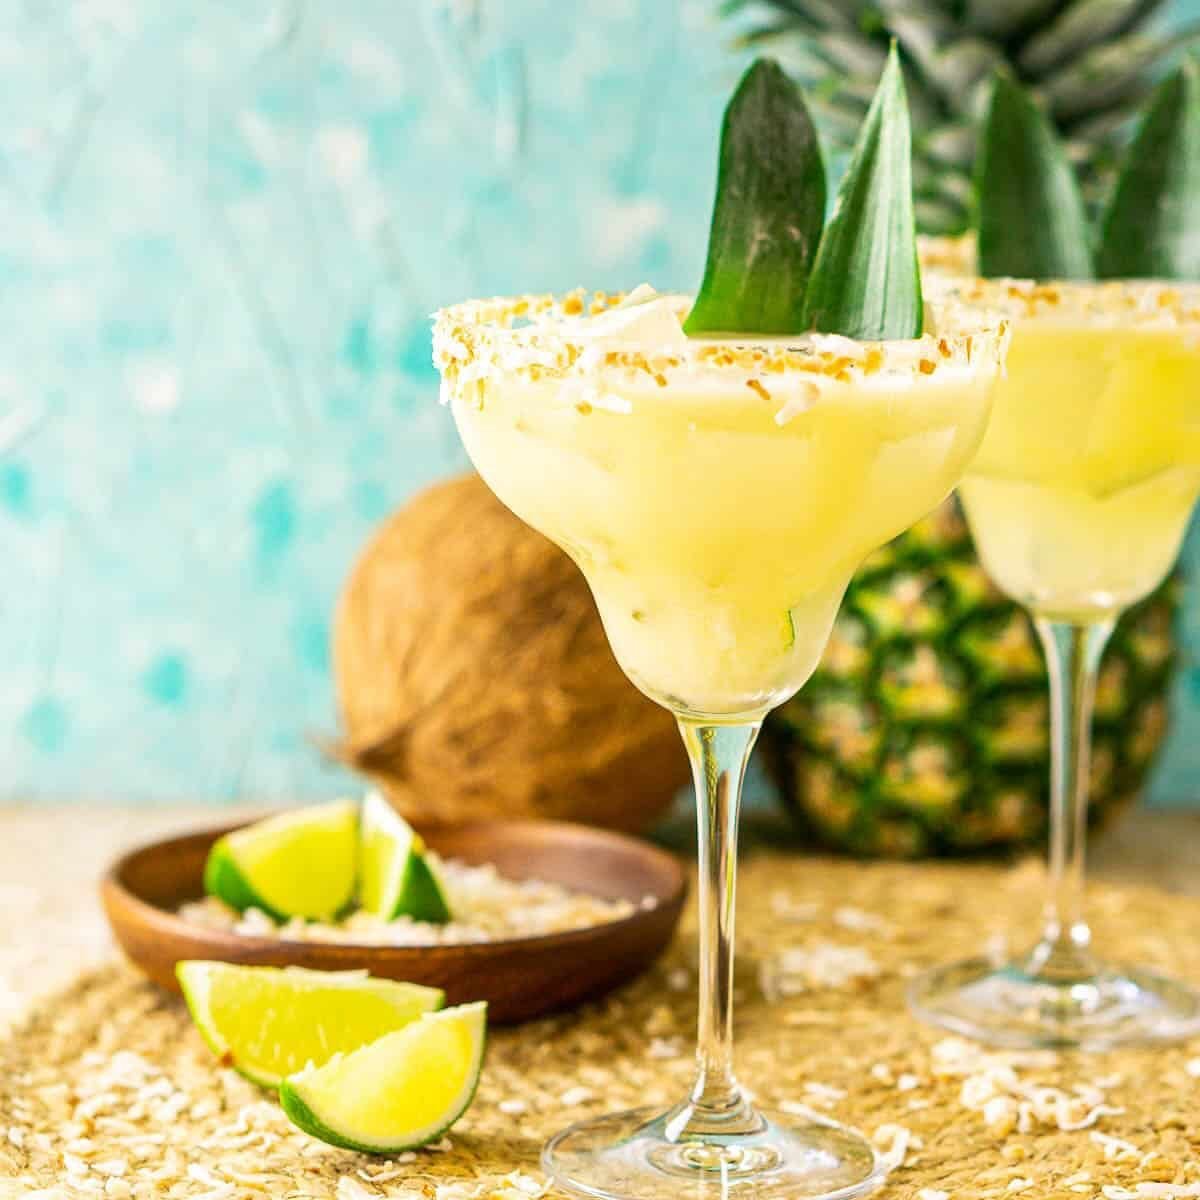 La-di-da-di, we like to party! 

Pineapple Coconut Margaritas today for Cinco de Mayo made with Casa San Mat&iacute;as Coraz&oacute;n Tequila, Pineapple, Coconut, Lime, and Organic Cane Sugar. 

Speedy Ping&uuml;ino on tap and available in cans to-go